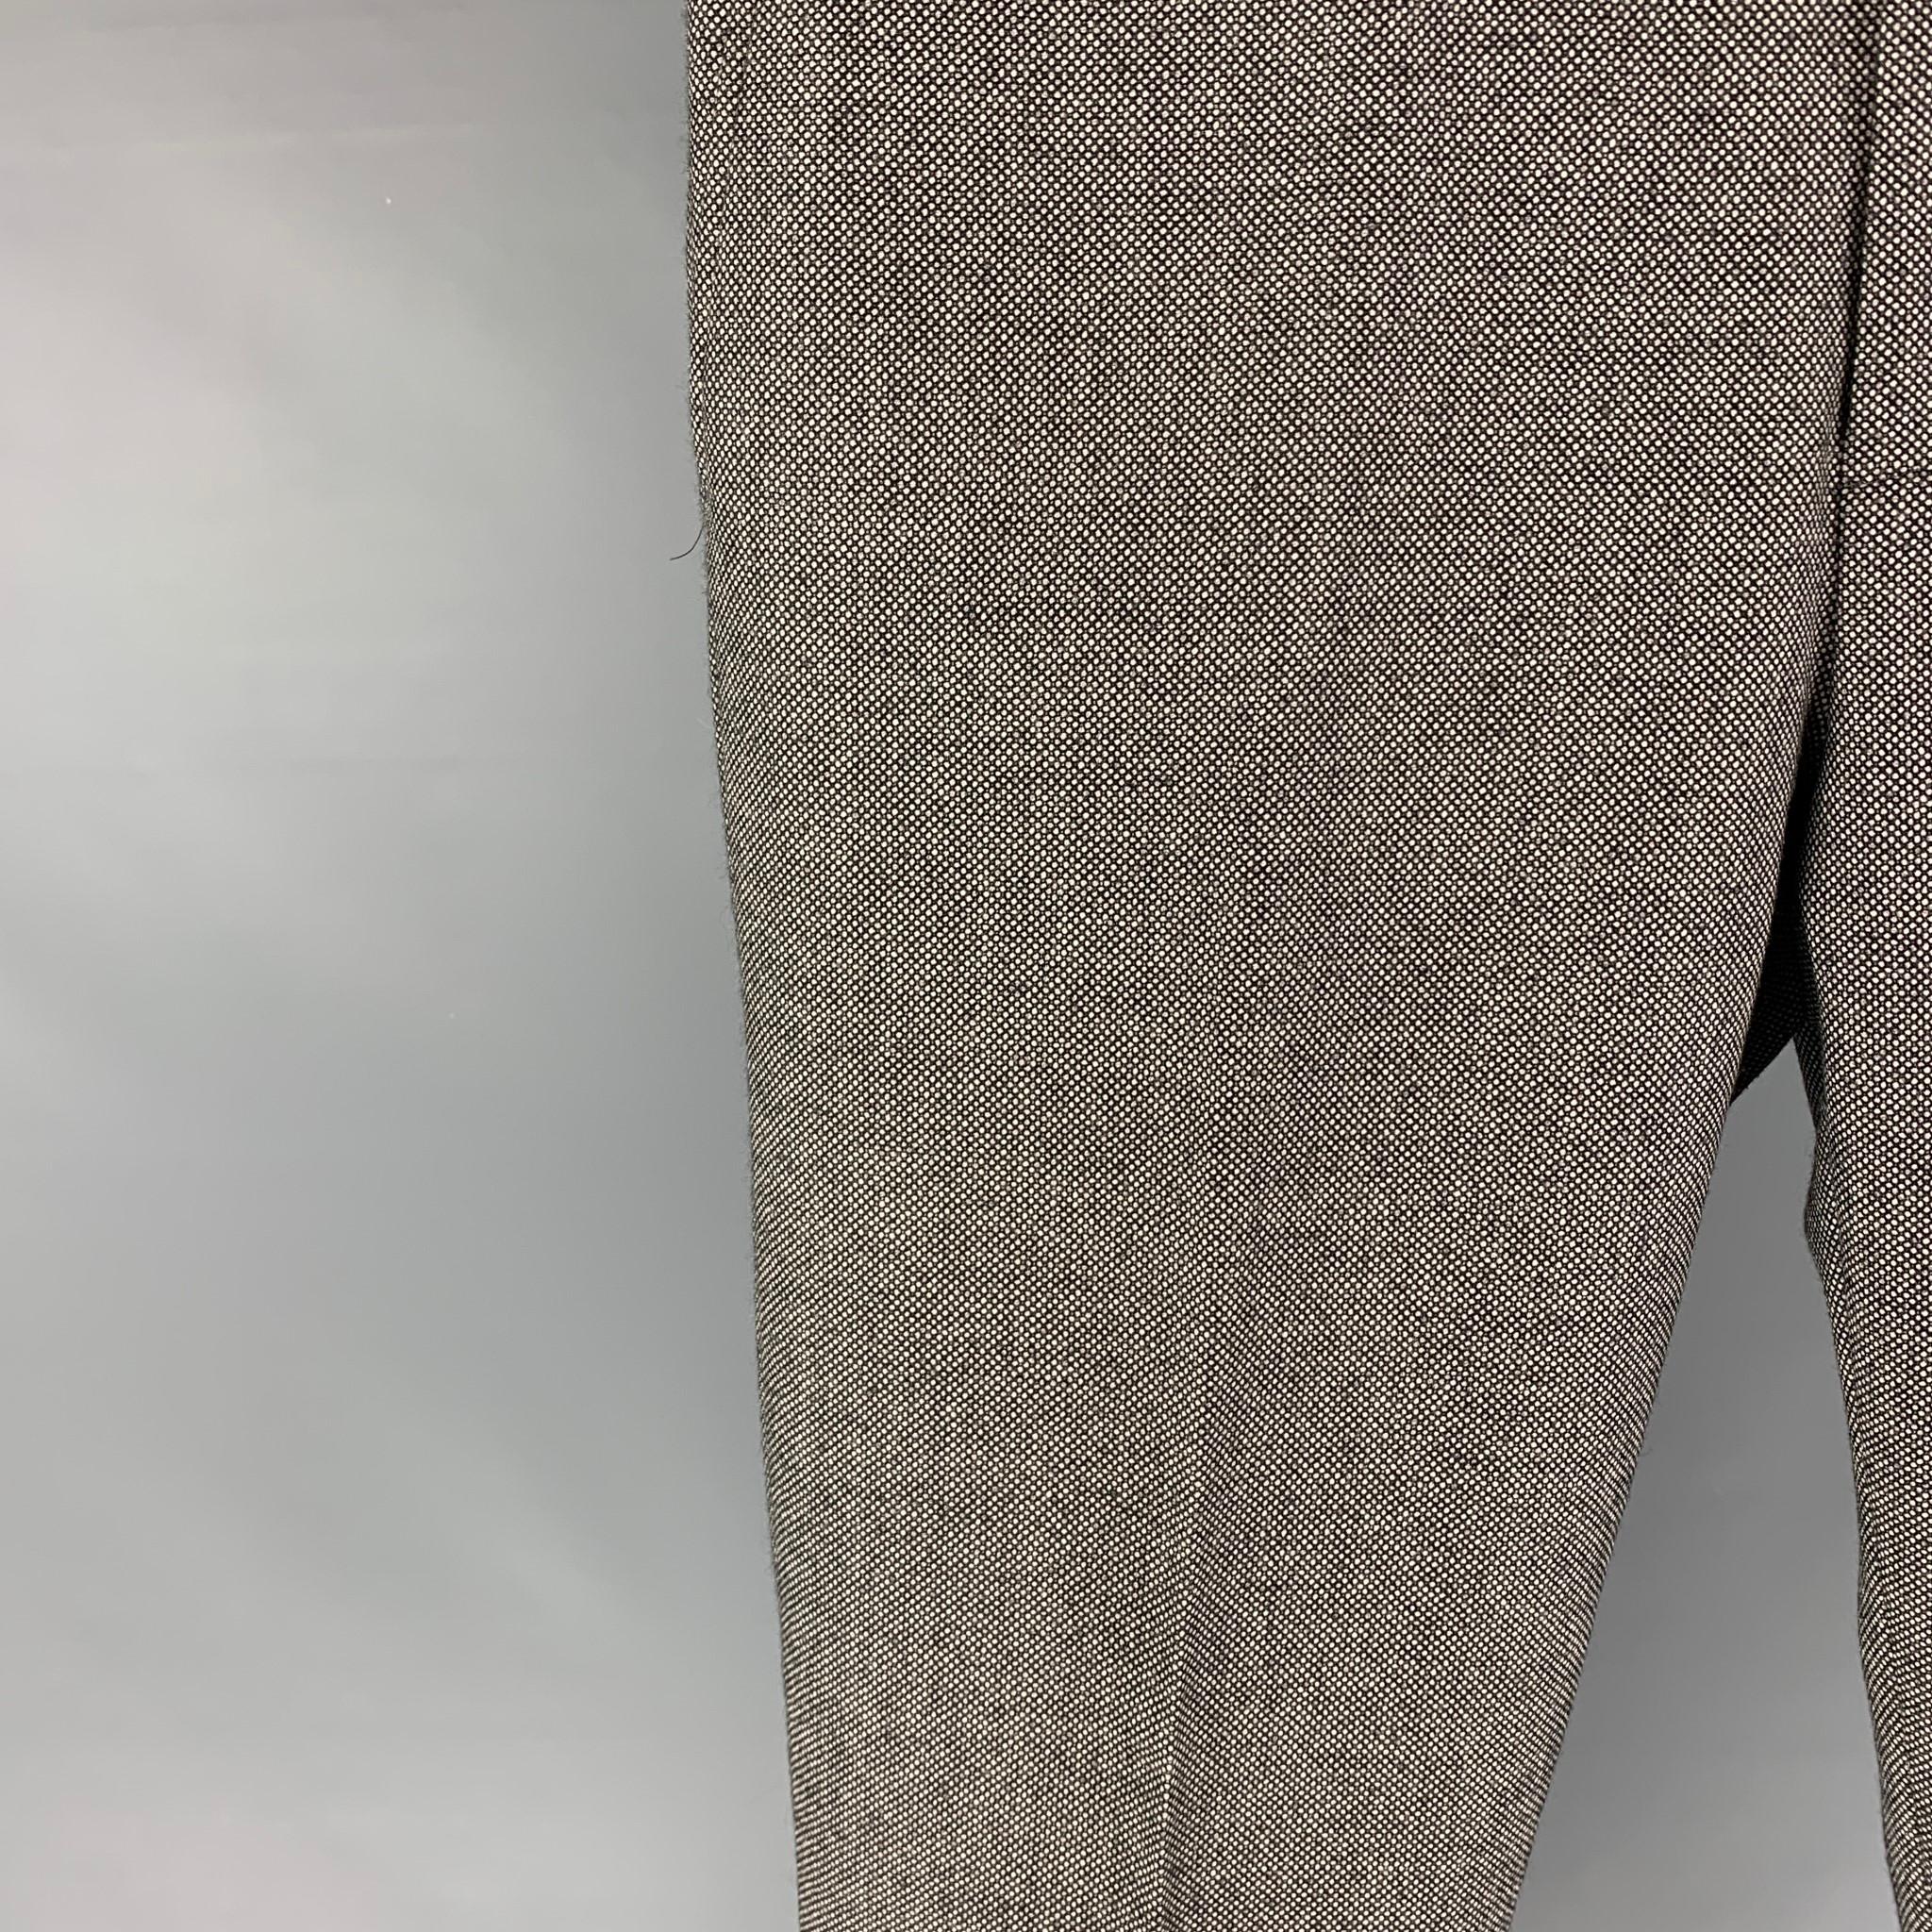 SUIT SUPPLY dress pants comes in a black & white nailhead wool featuring a flat front, slim fit, and a zip fly closure. 

Excellent Pre-Owned Condition.
Marked: 48/32

Measurements:

Waist: 34 in.
Rise: 10 in.
Inseam: 30 in.
Leg Opening: 13 in.

 